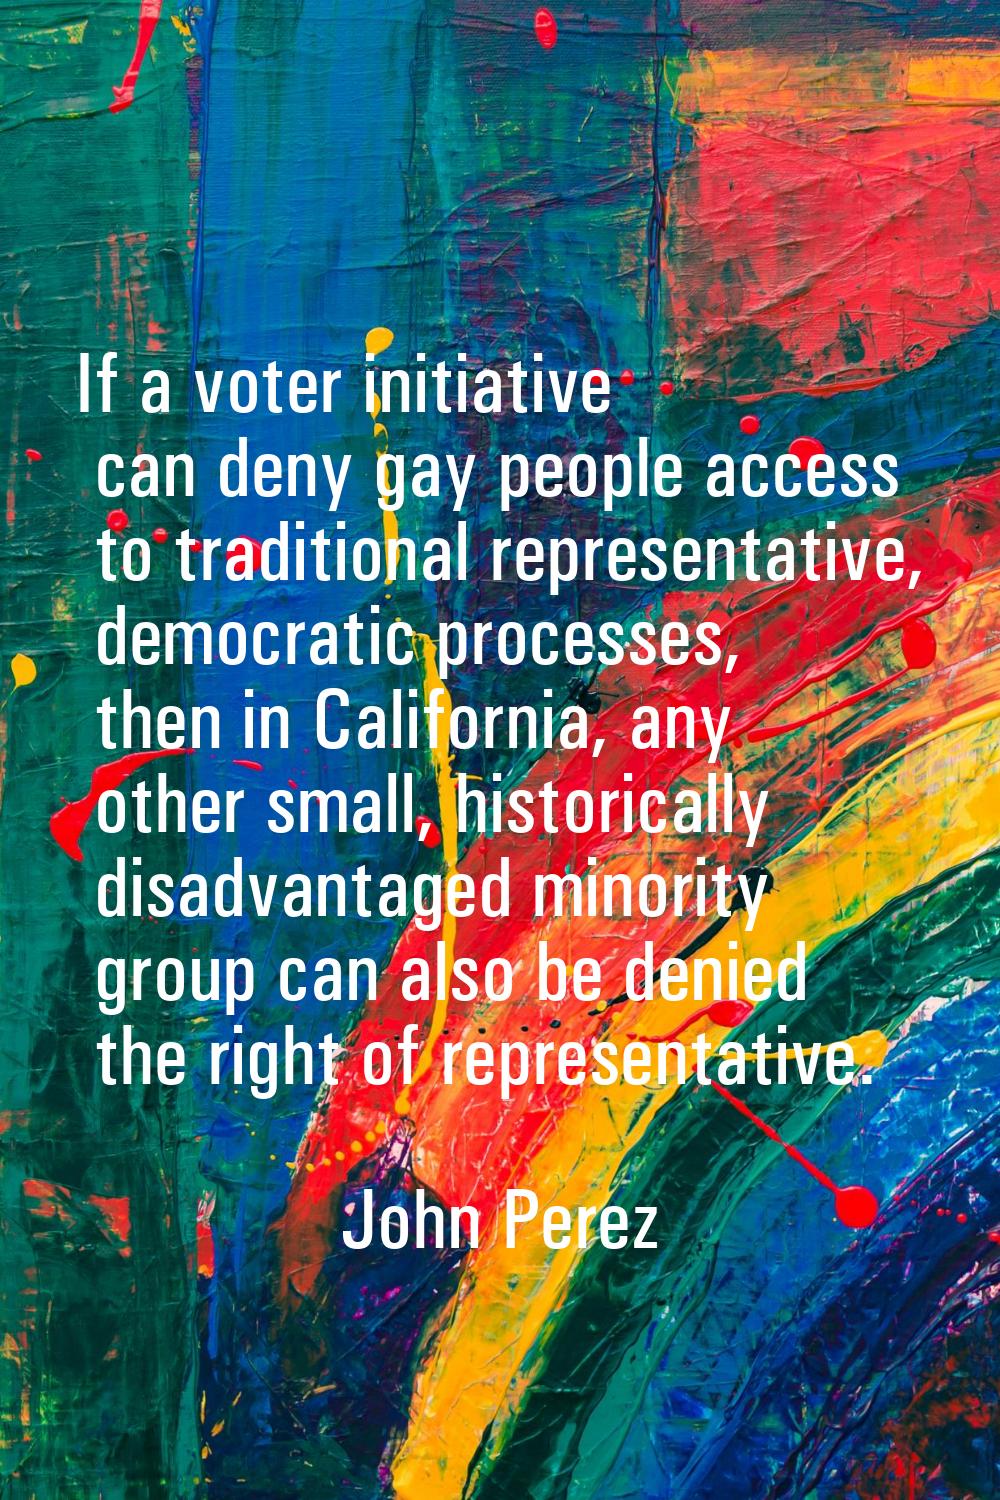 If a voter initiative can deny gay people access to traditional representative, democratic processe